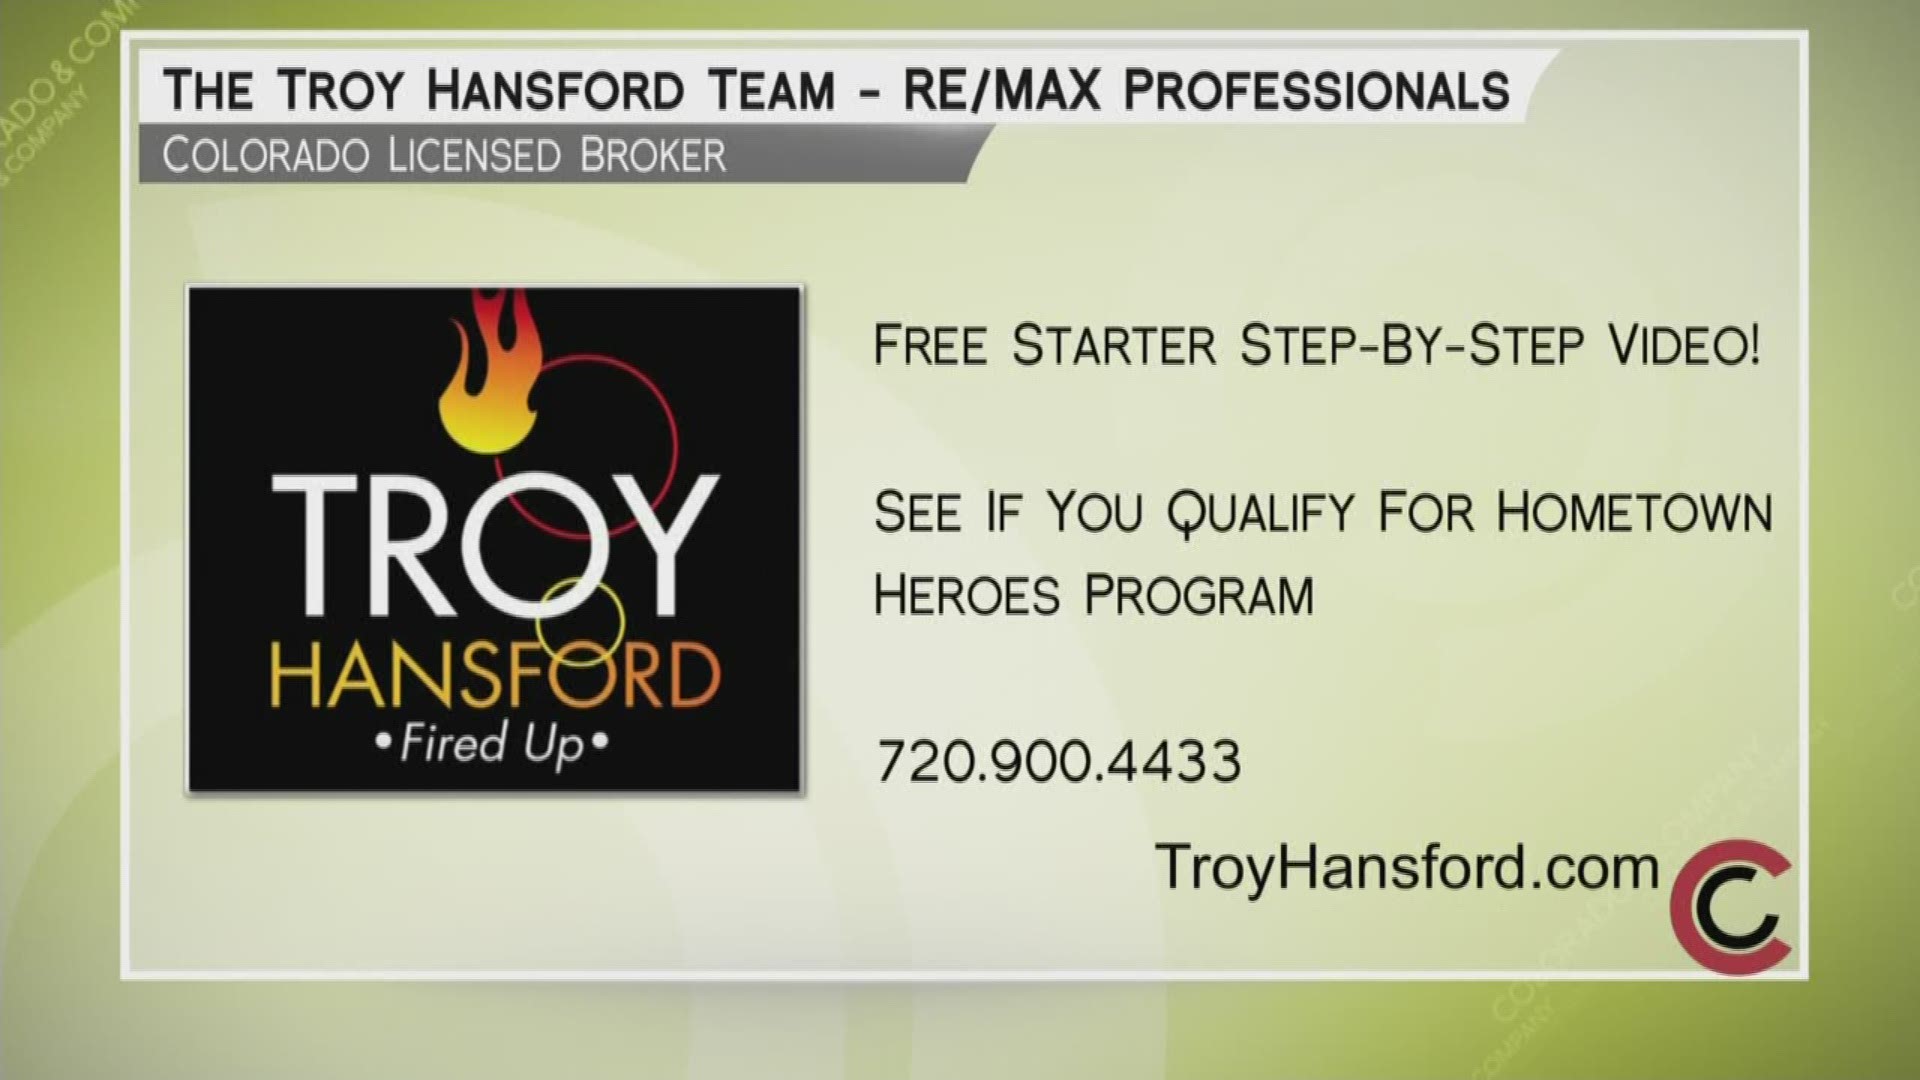 The Troy Hansford Team can ignite your plans into action. Learn about his Hometown Heroes program and get started today at 720.900.4433. Check out TroyHansford.com.